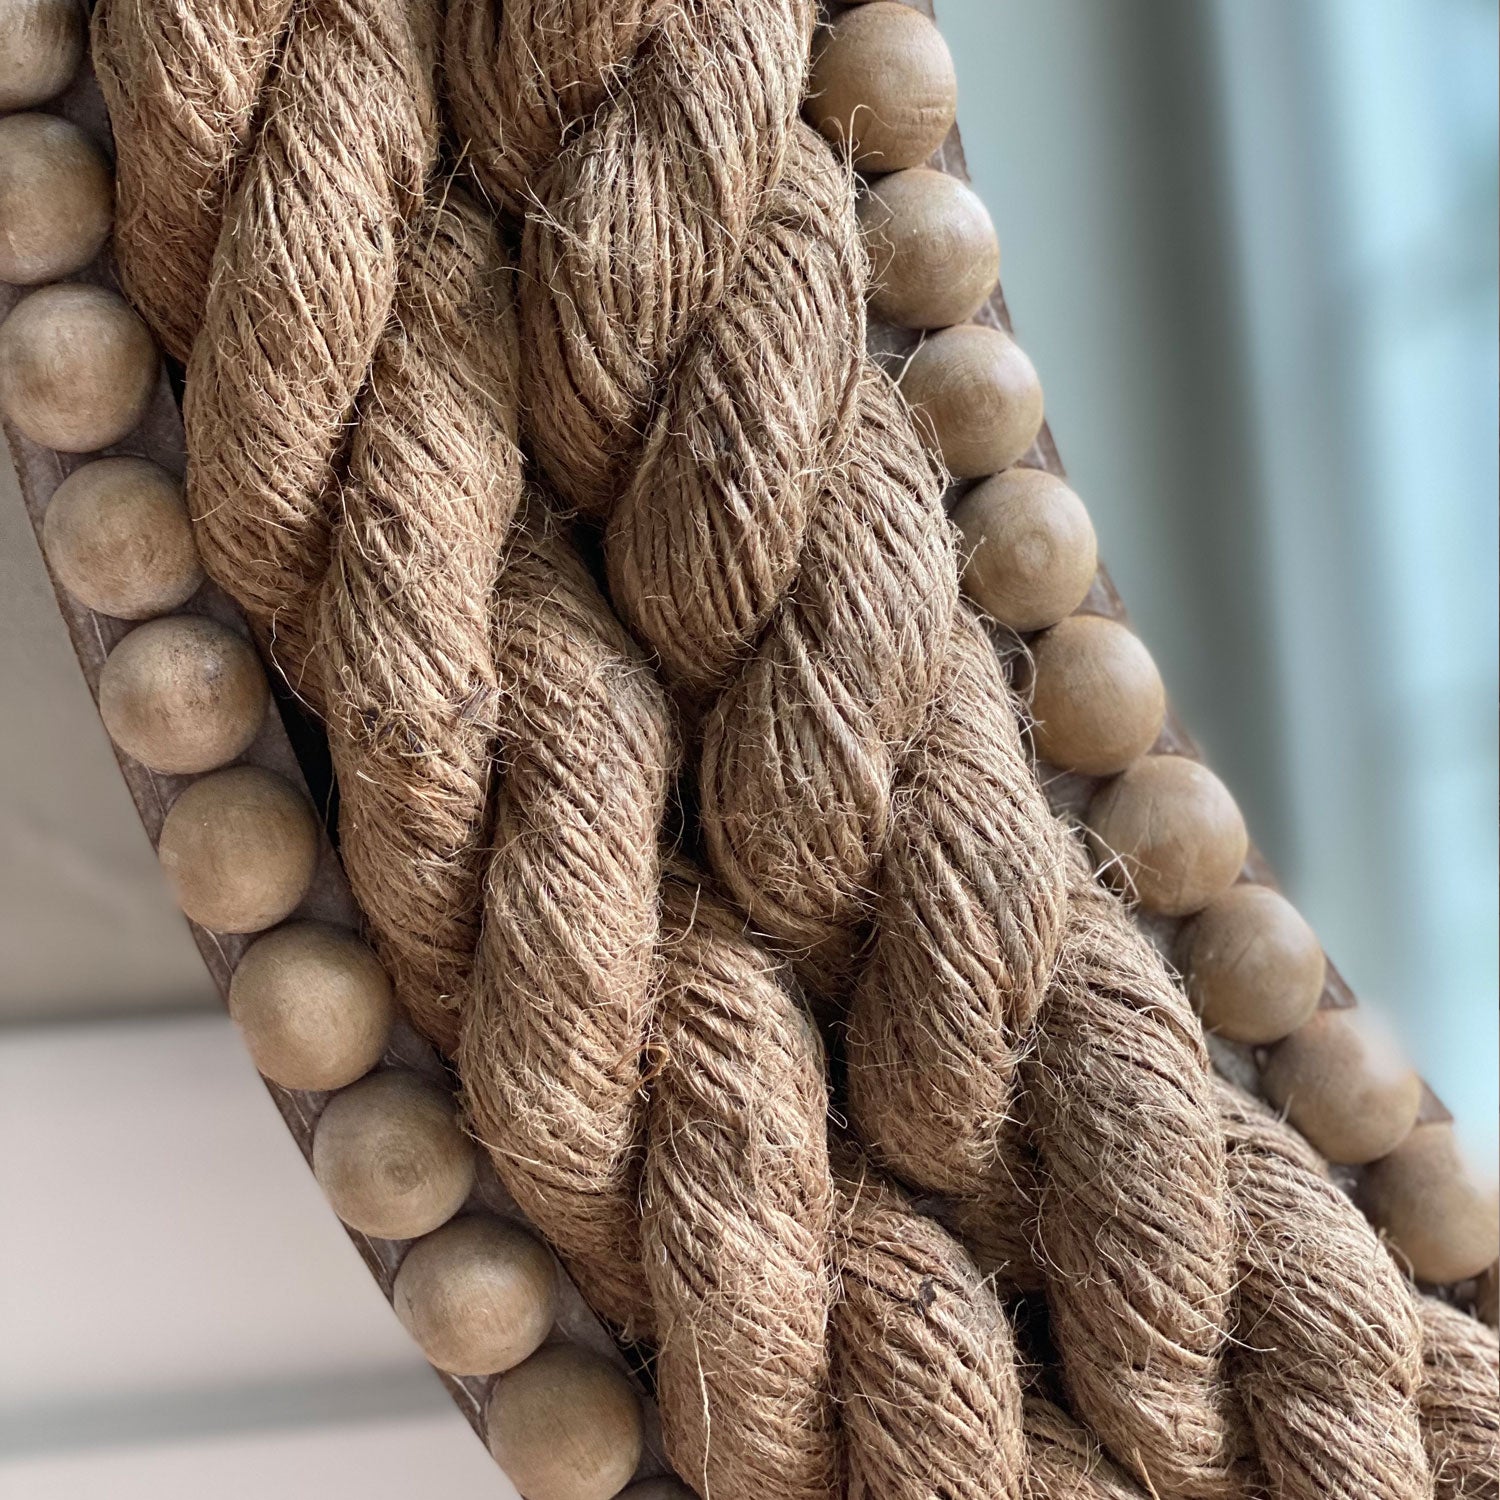 The MaryAnn hand braided rope mirror rope detail up close Galey Alix